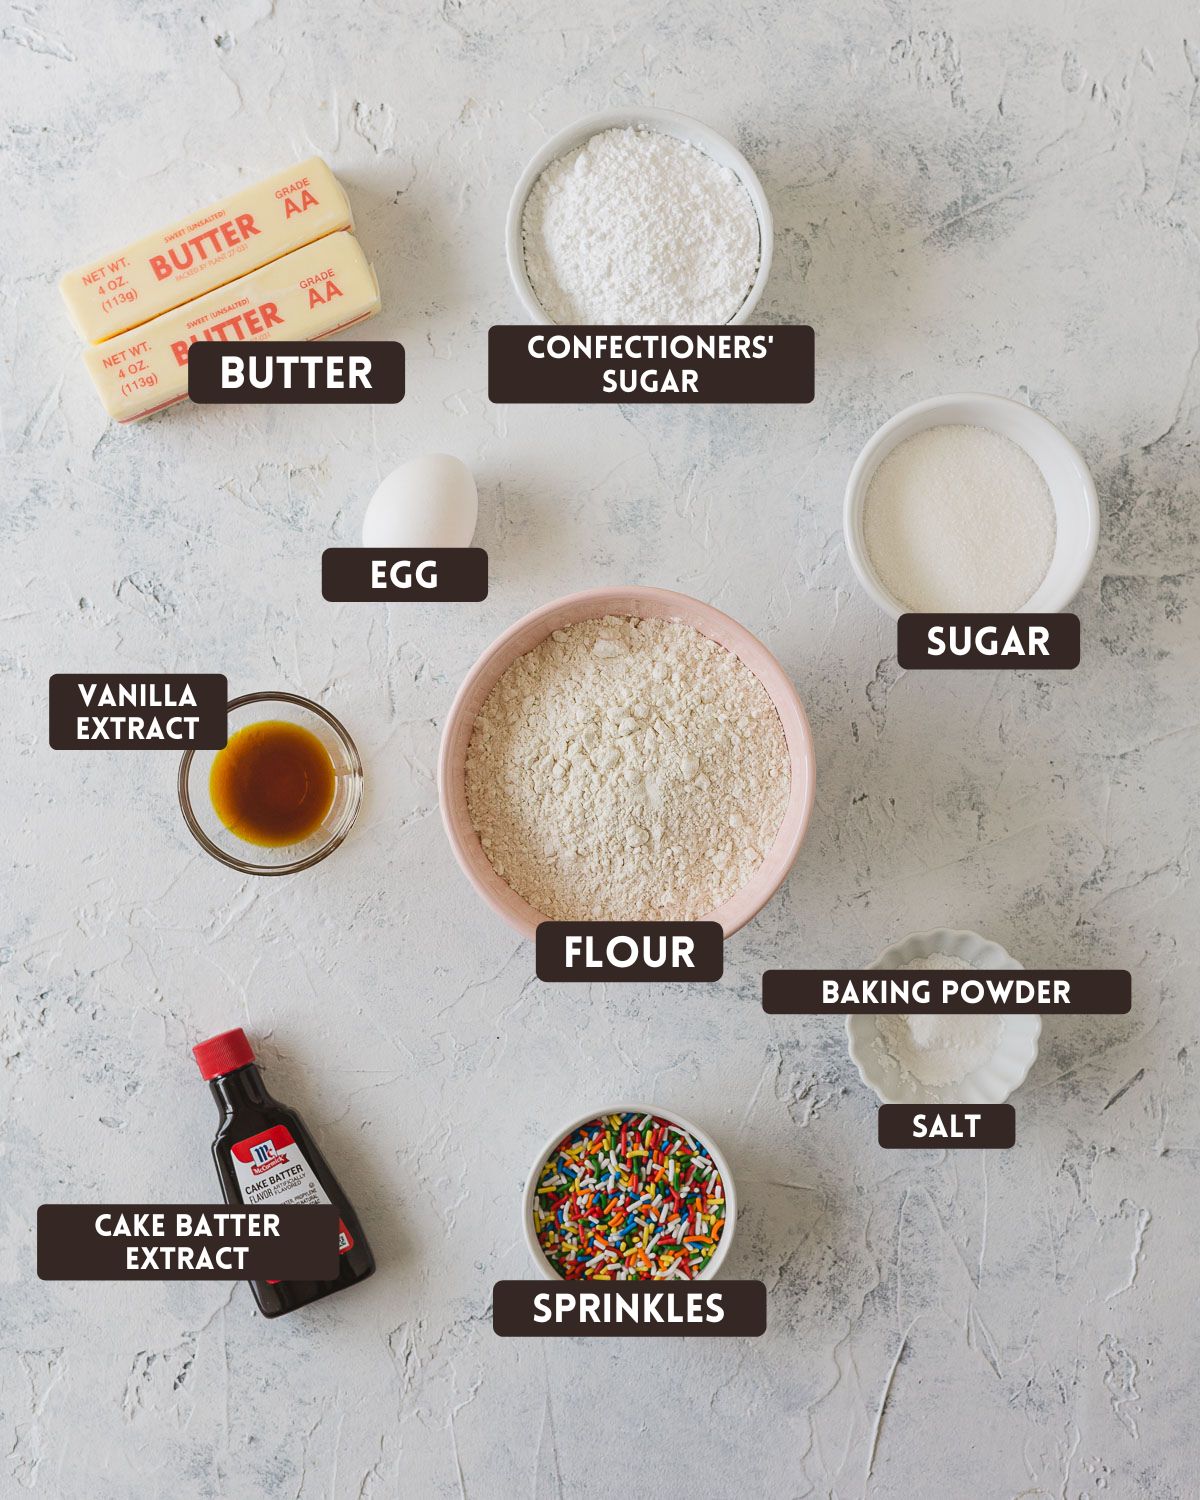 Labelled ingredients for Funfetti Cookies: butter, confectioners' sugar, egg, sugar, vanilla extract, flour, cake batter extract, sprinkles, baking powder, and salt.